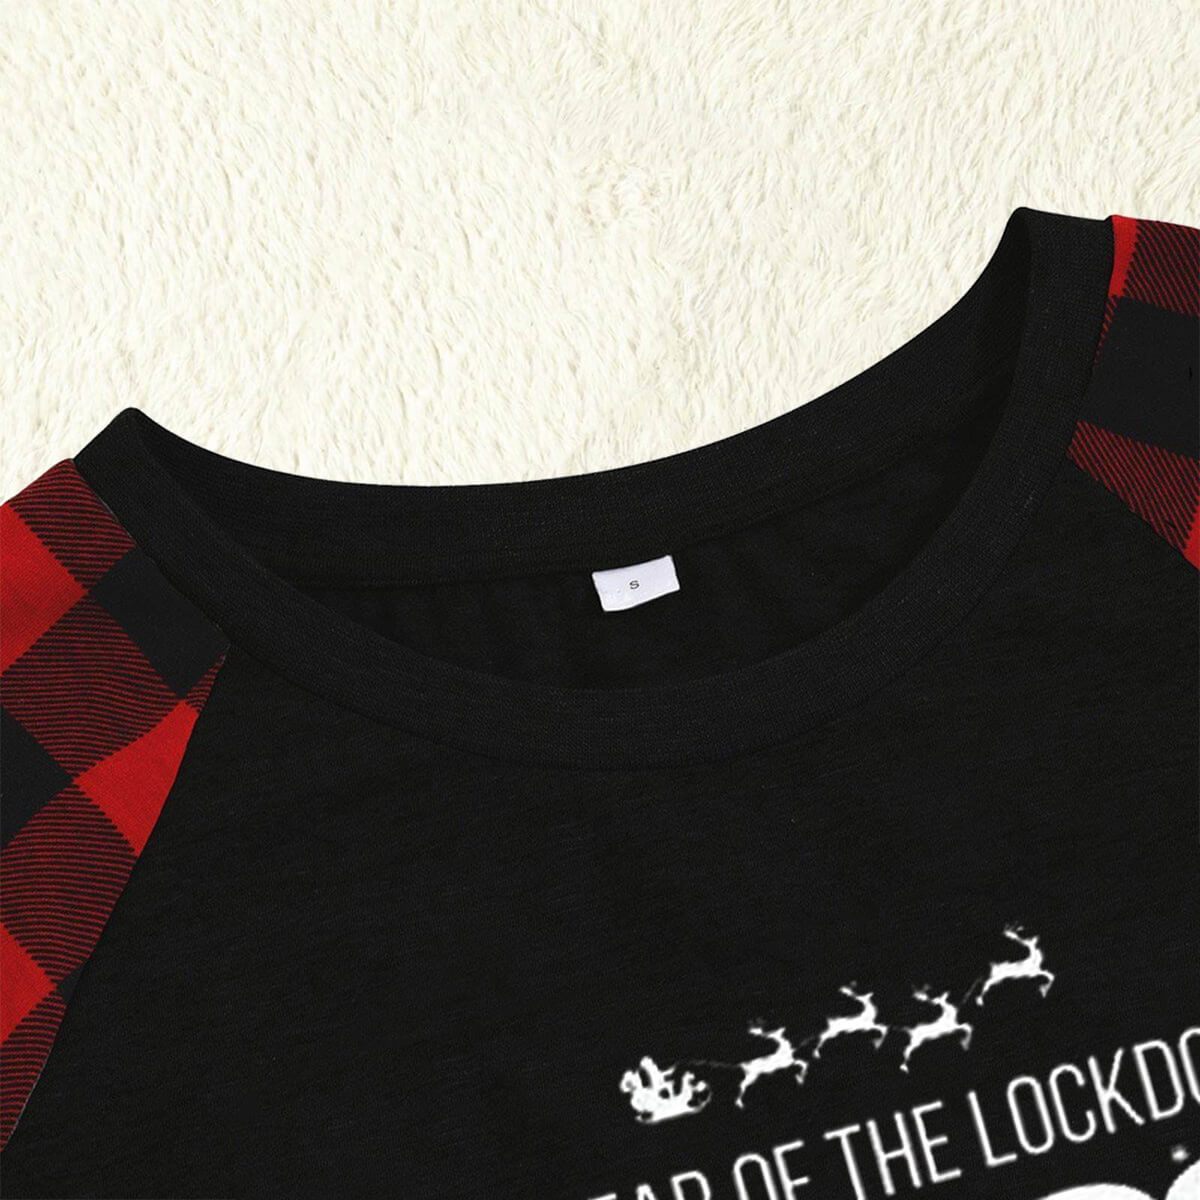 "The Year Of The Lockdown" 2021 Print Family Matching Pajamas Sets - Black